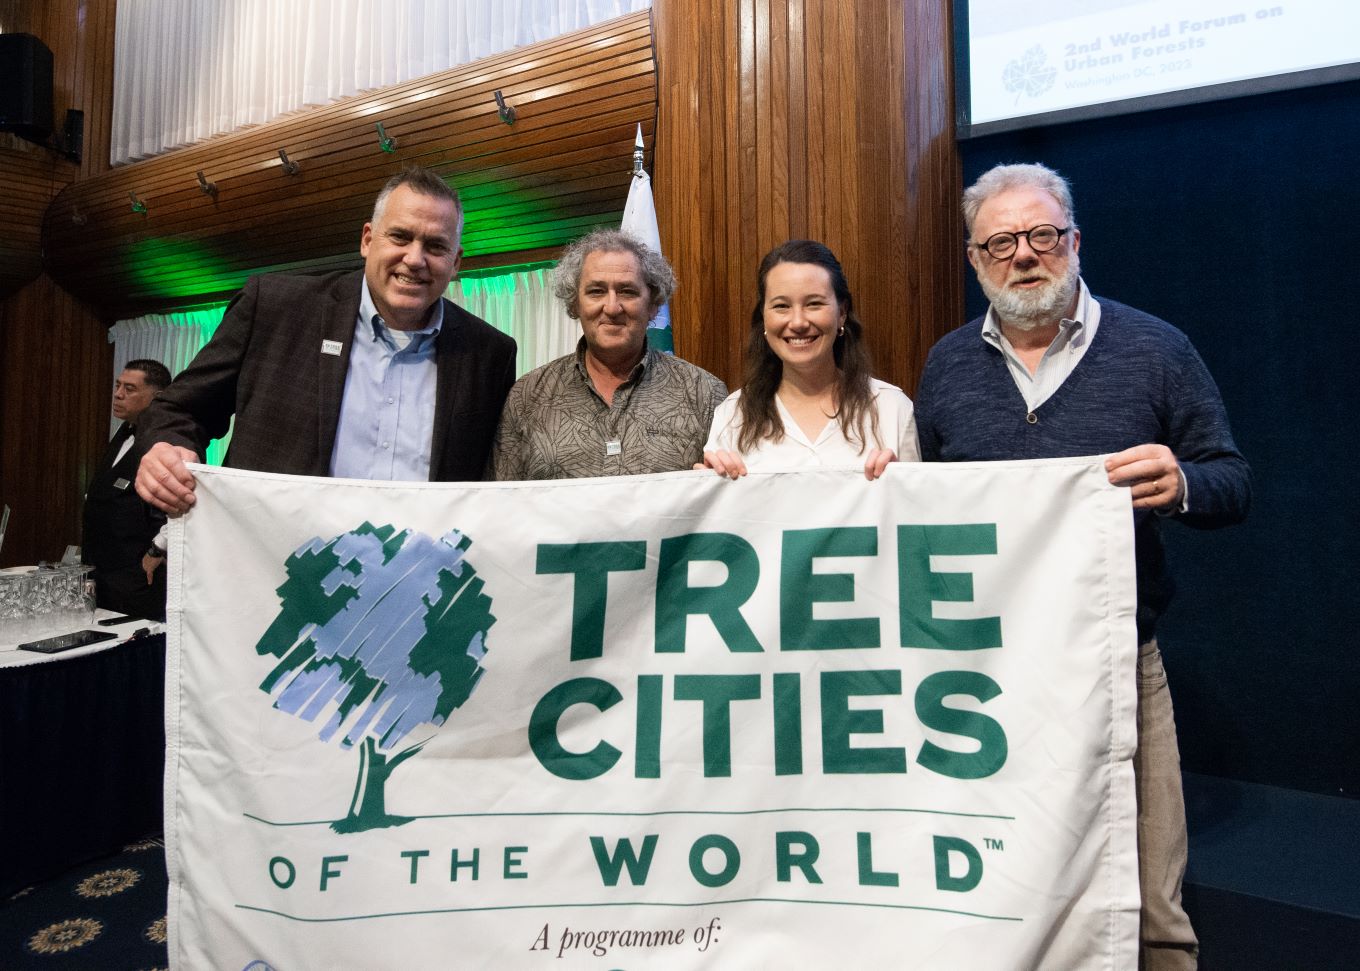 (L-R) Dan Lambe, CEO Arbor Day Foundation, Howell Davies, Auckland Council’s Principal Specialist – Urban Ngahere, Alana Tucker from the Tree Equity Alliance, Simone Borelli, from the foresty division of the Food and Agriculture Organization of the United Nations.